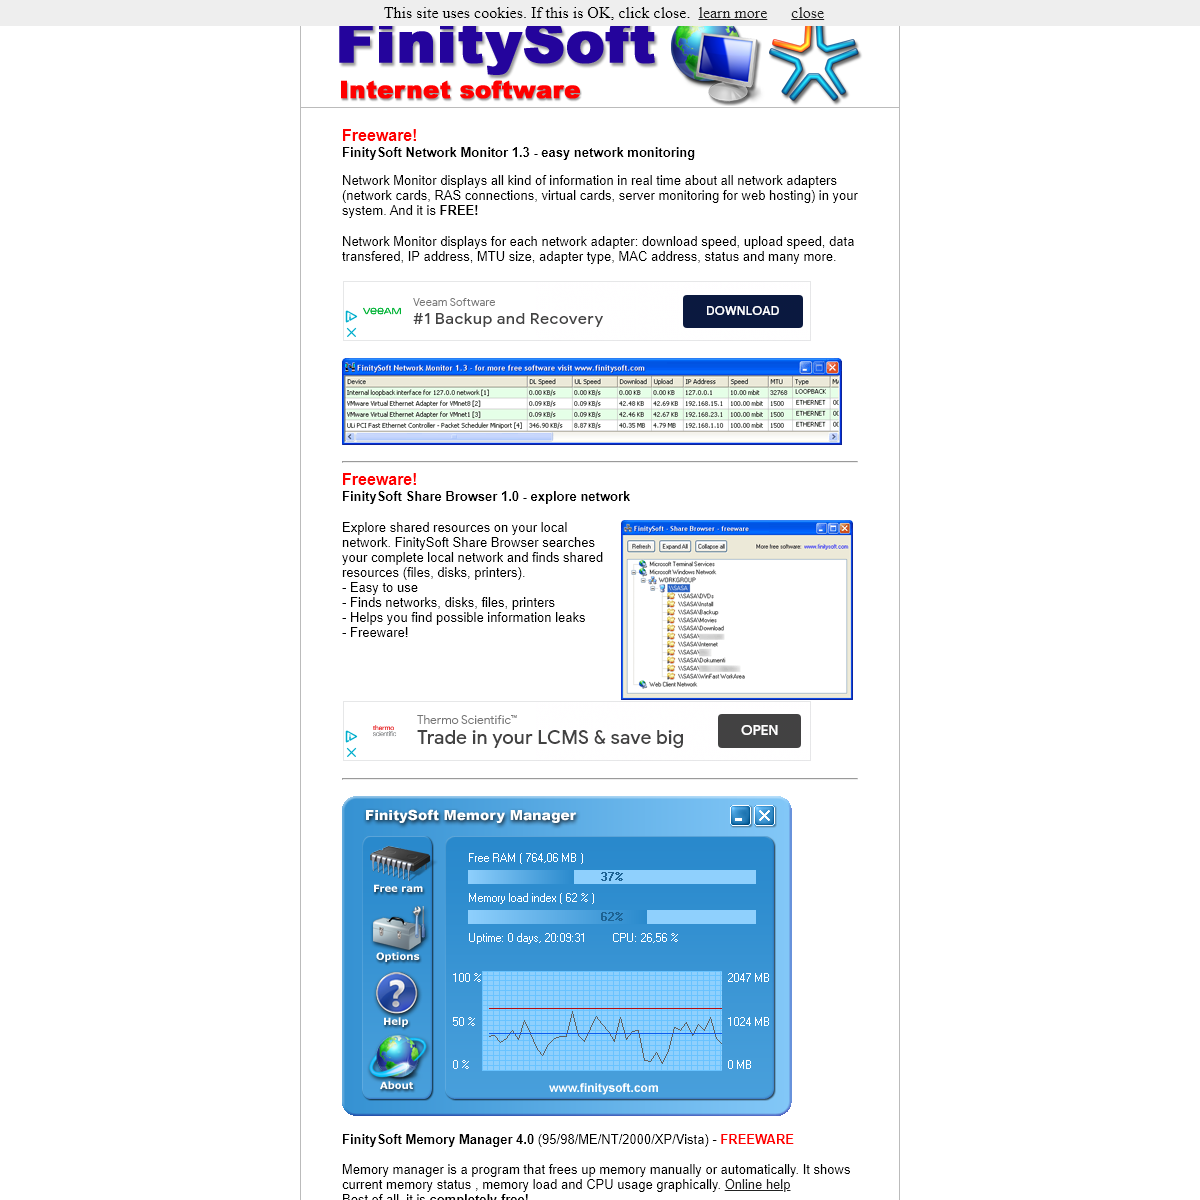 FinitySoft - Free Network Monitor, Free Network Share browser, Free Food Additives information